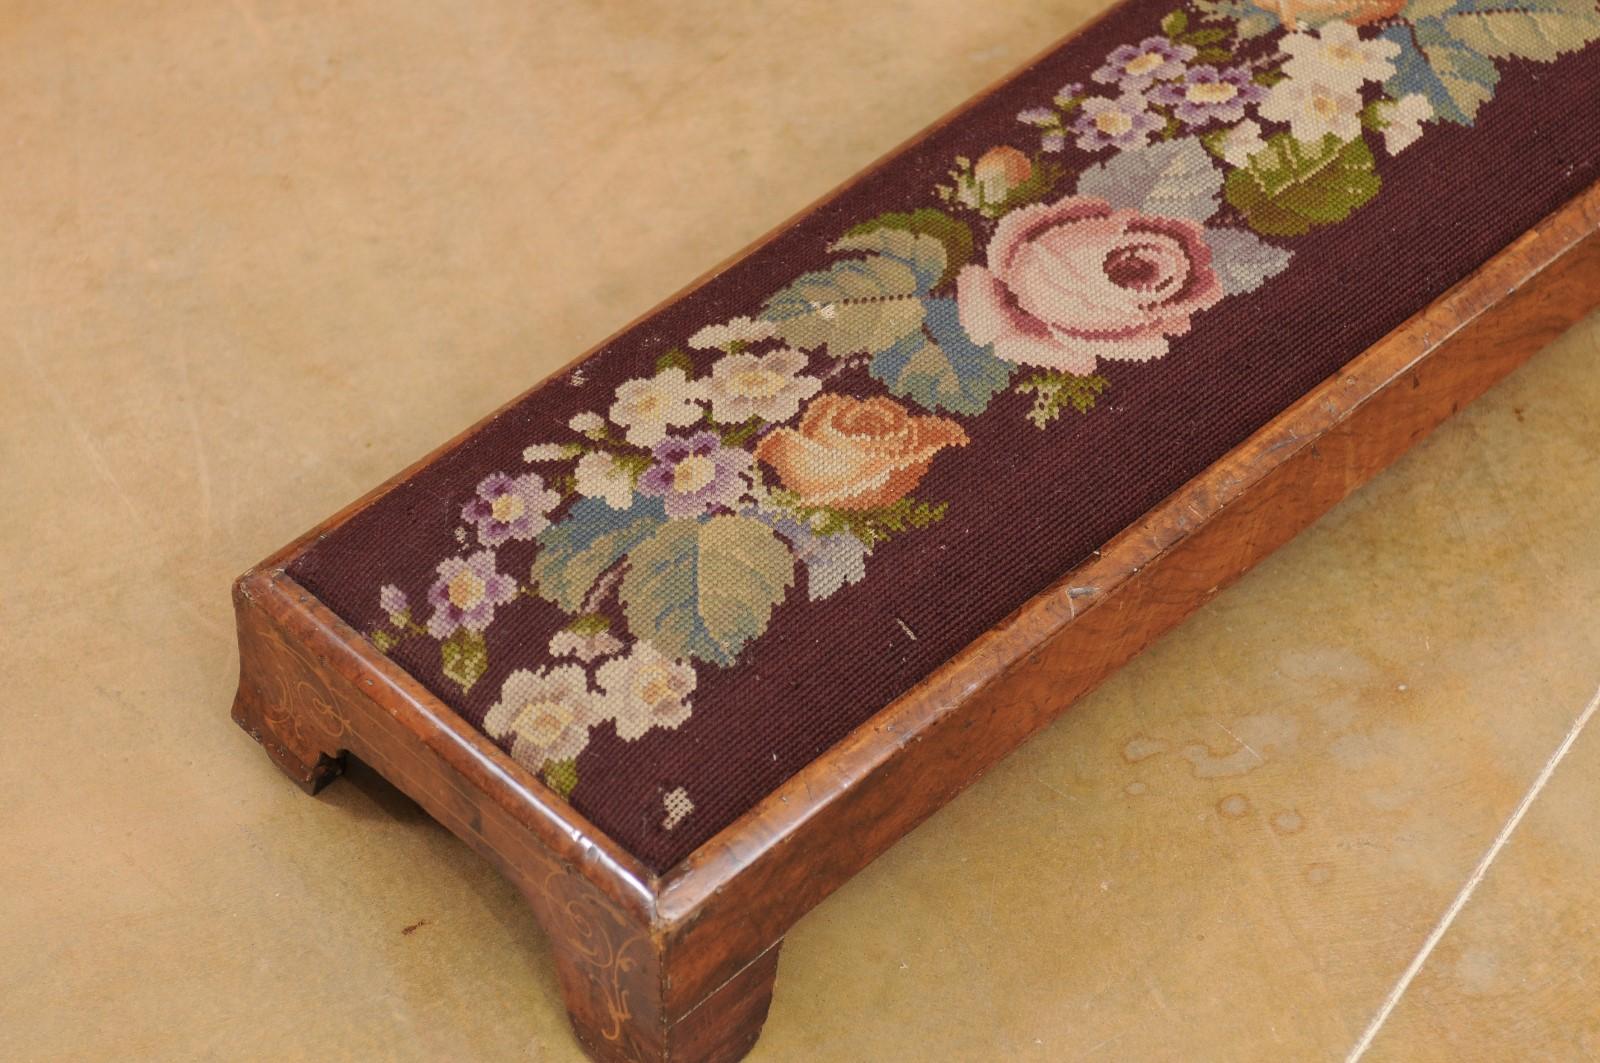 19th Century French 1860s Napoléon III Period Long Needlepoint Footstool with Floral Décor